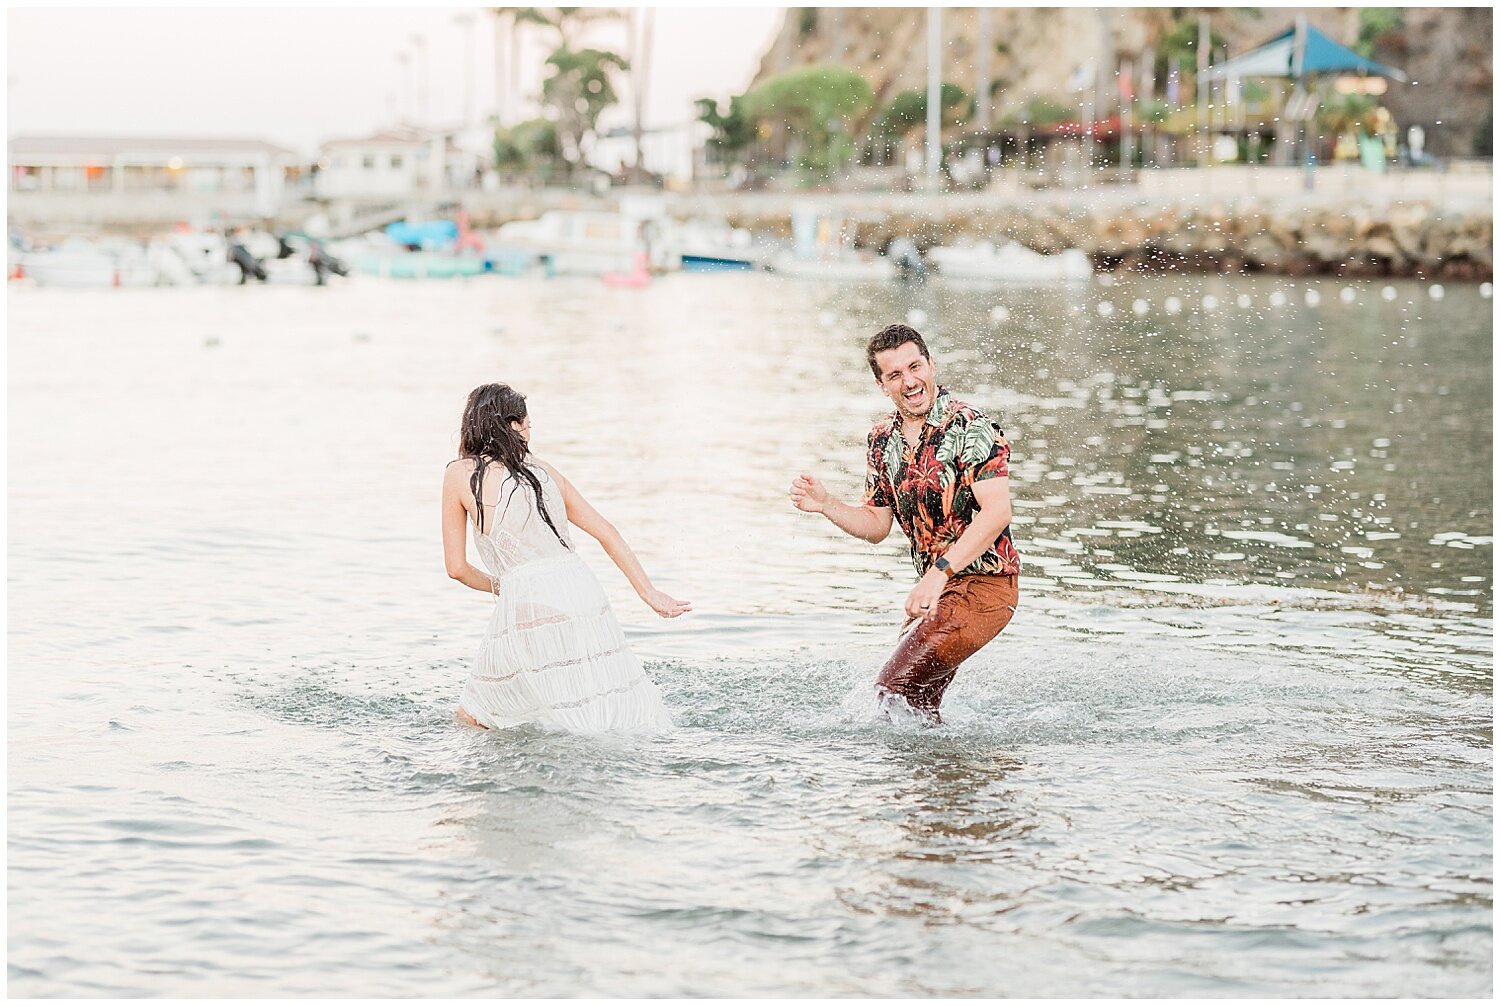  The Notebook inspired wedding couple photos, destination wedding photographer based in San Diego, adventure elopement photography 